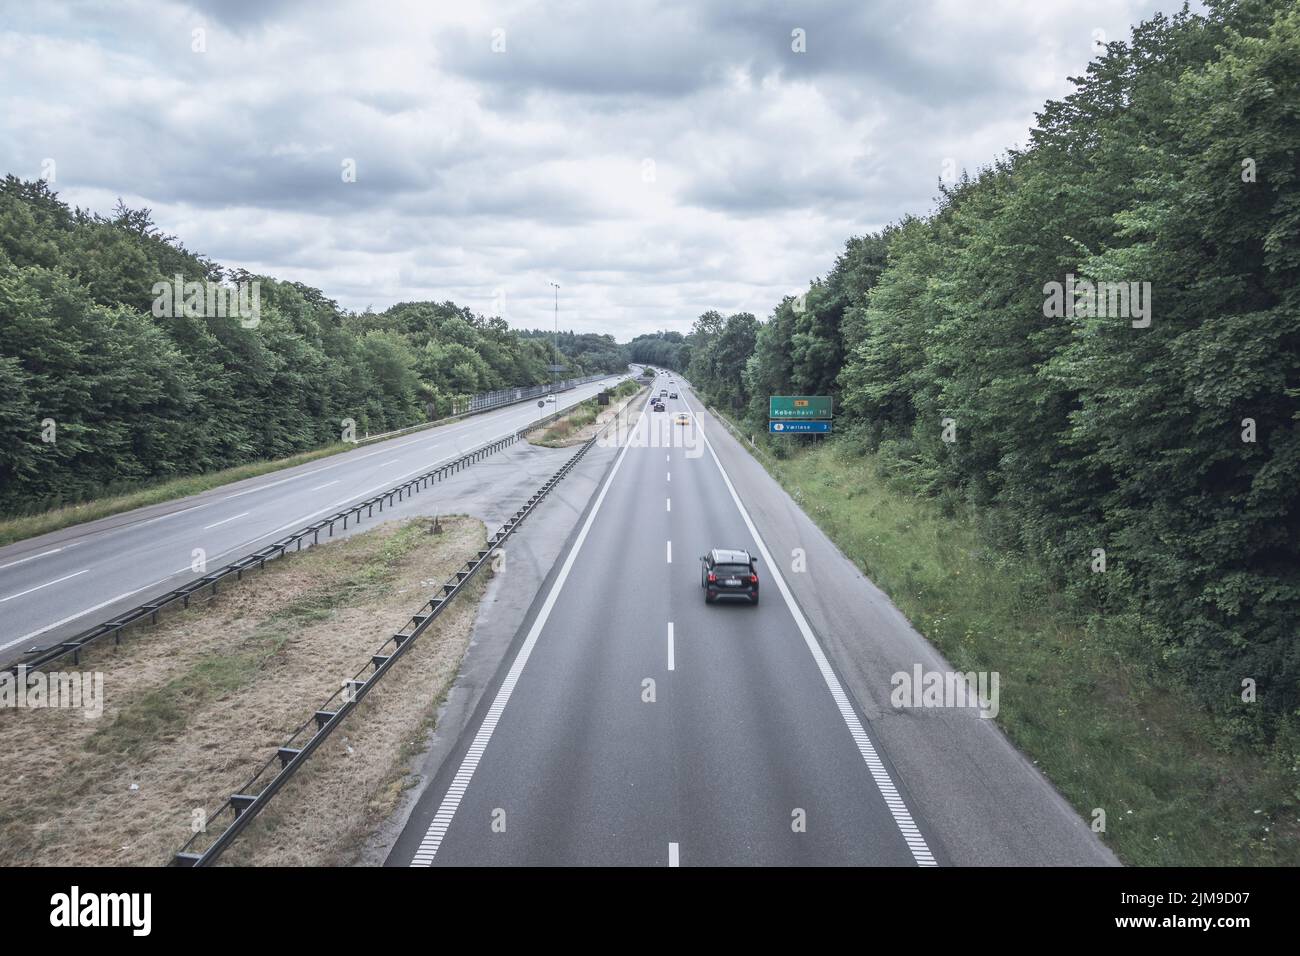 The Hillerod / Hillerød motorway route 16. The route is one of the major approaches to Copenhagen Stock Photo